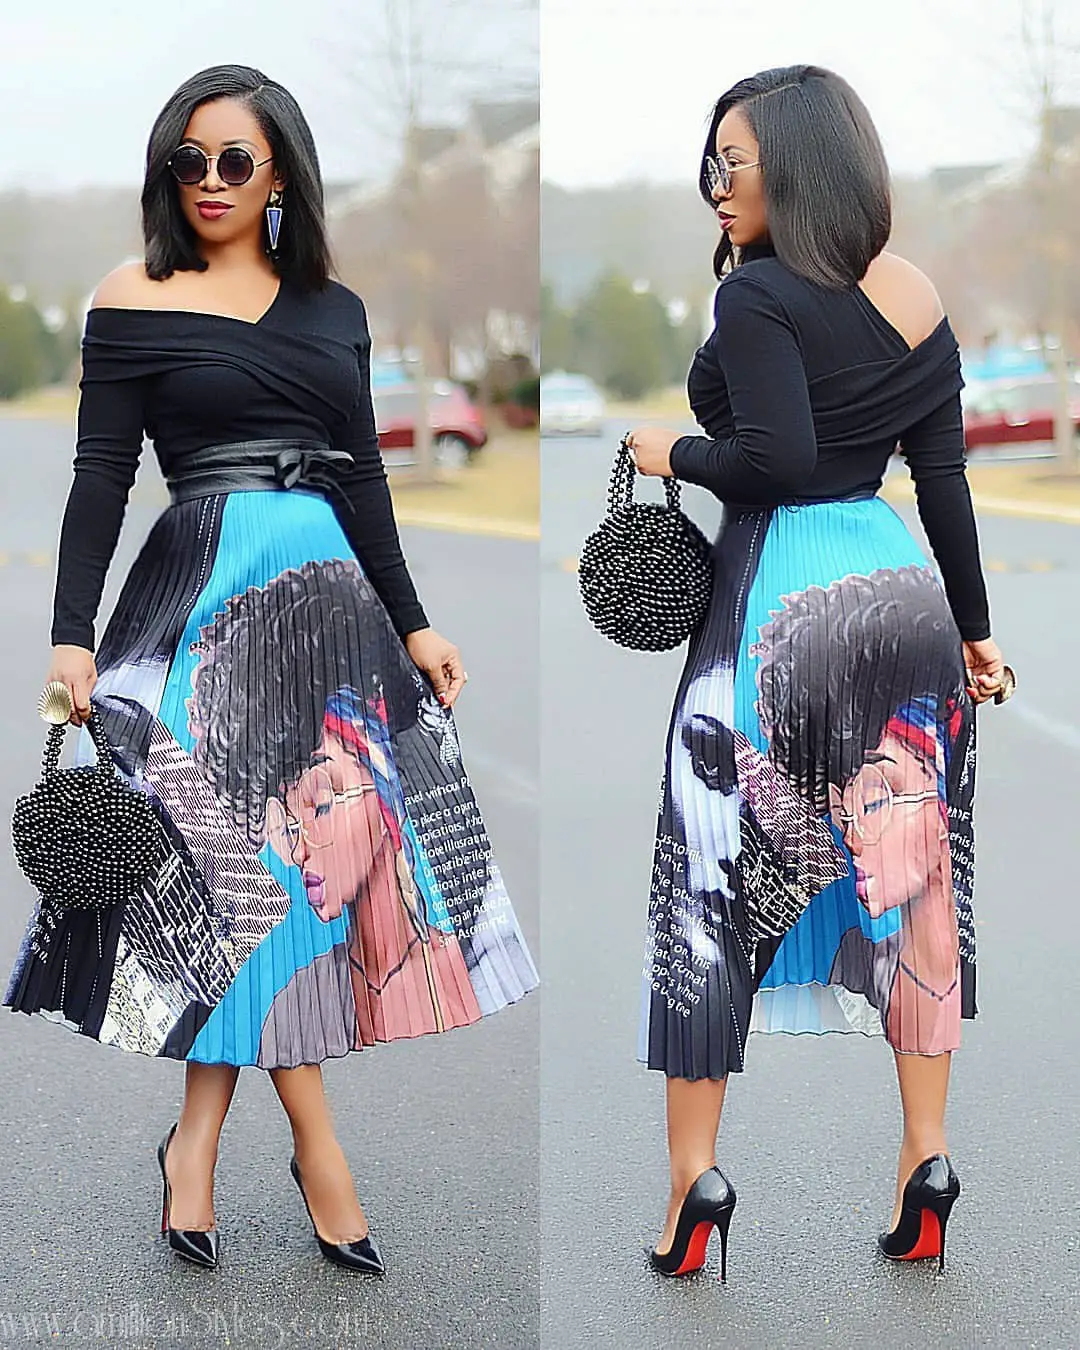 Get Inspiration On How To Style Pleated Skirts From These Fashionistas ...